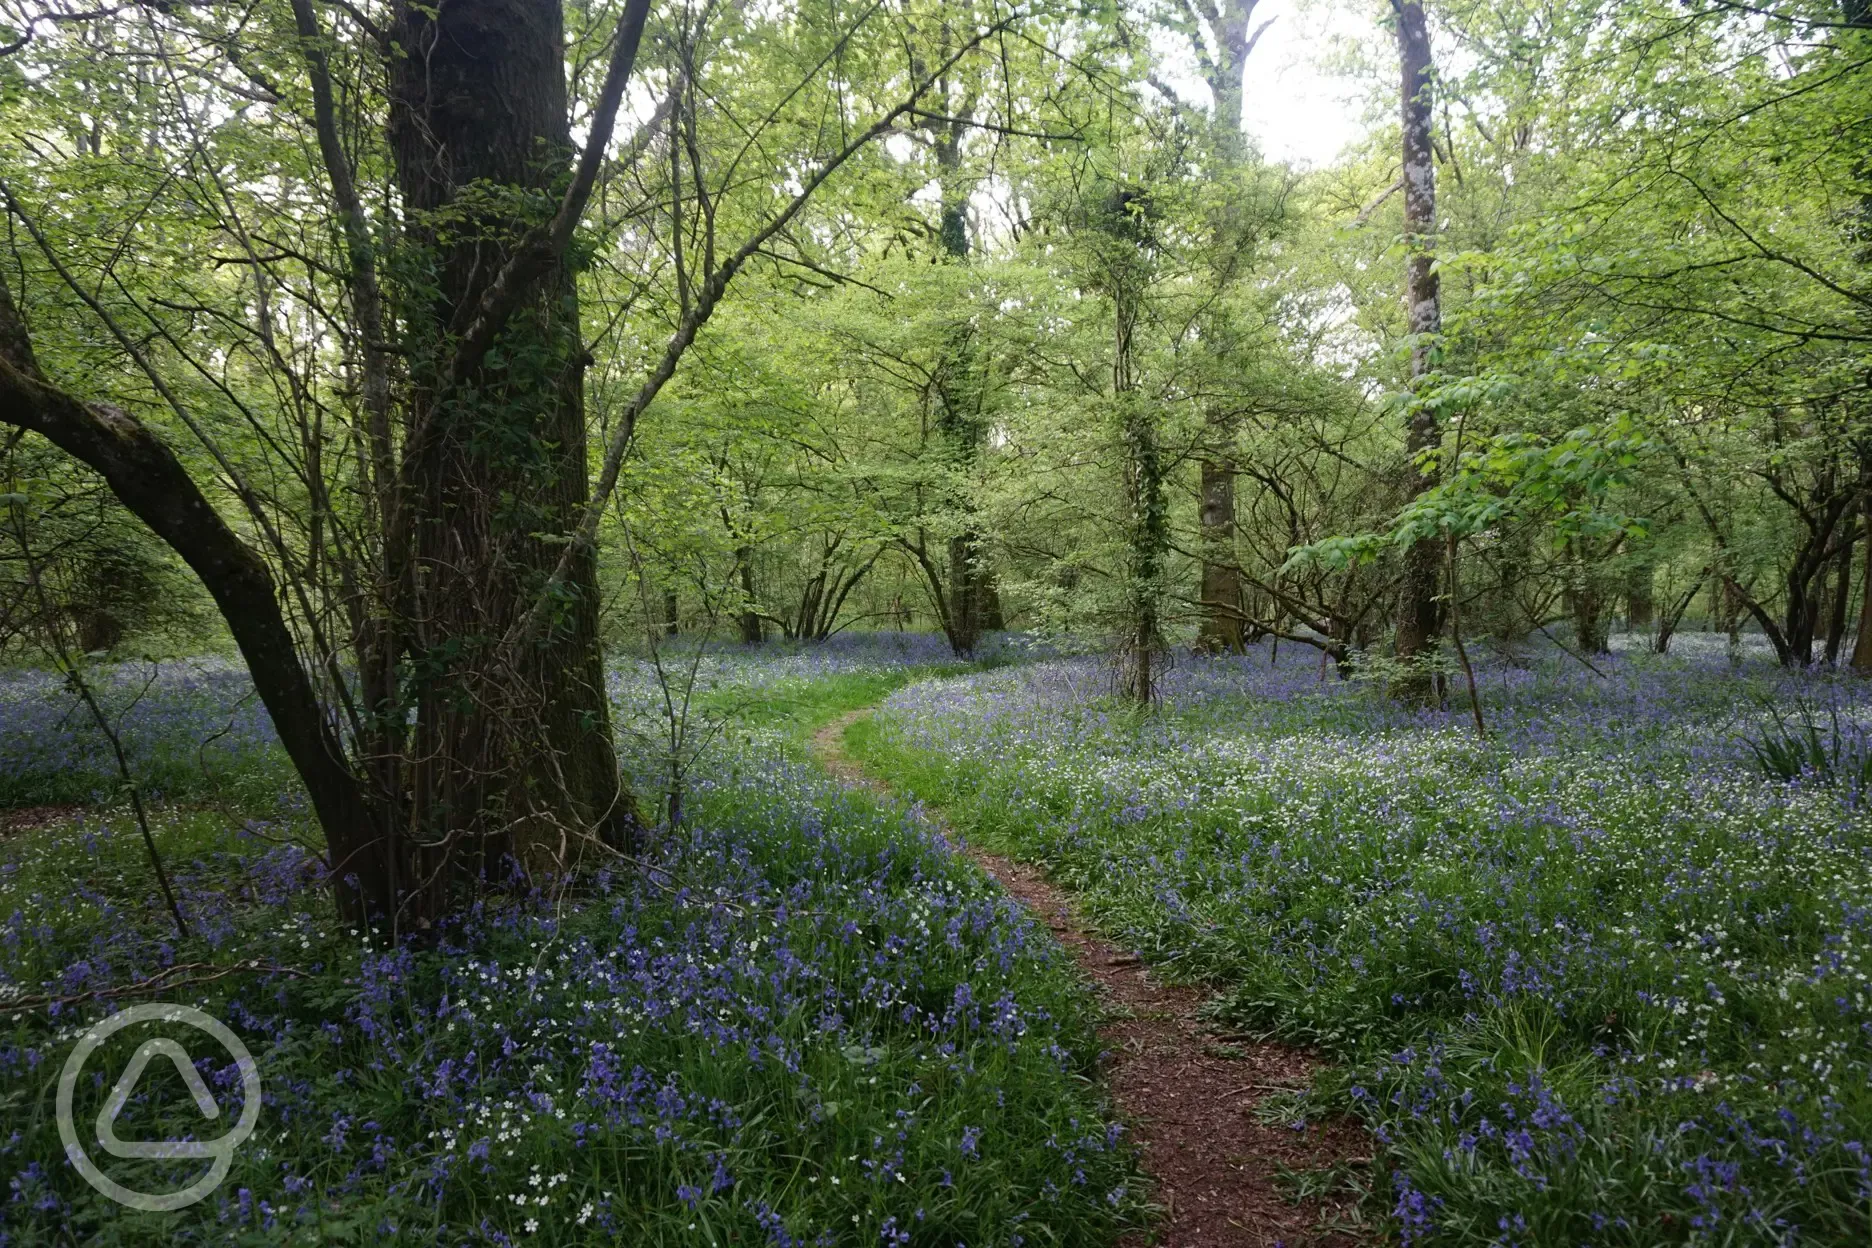 Nearby Bluebell woods ajoining the farm